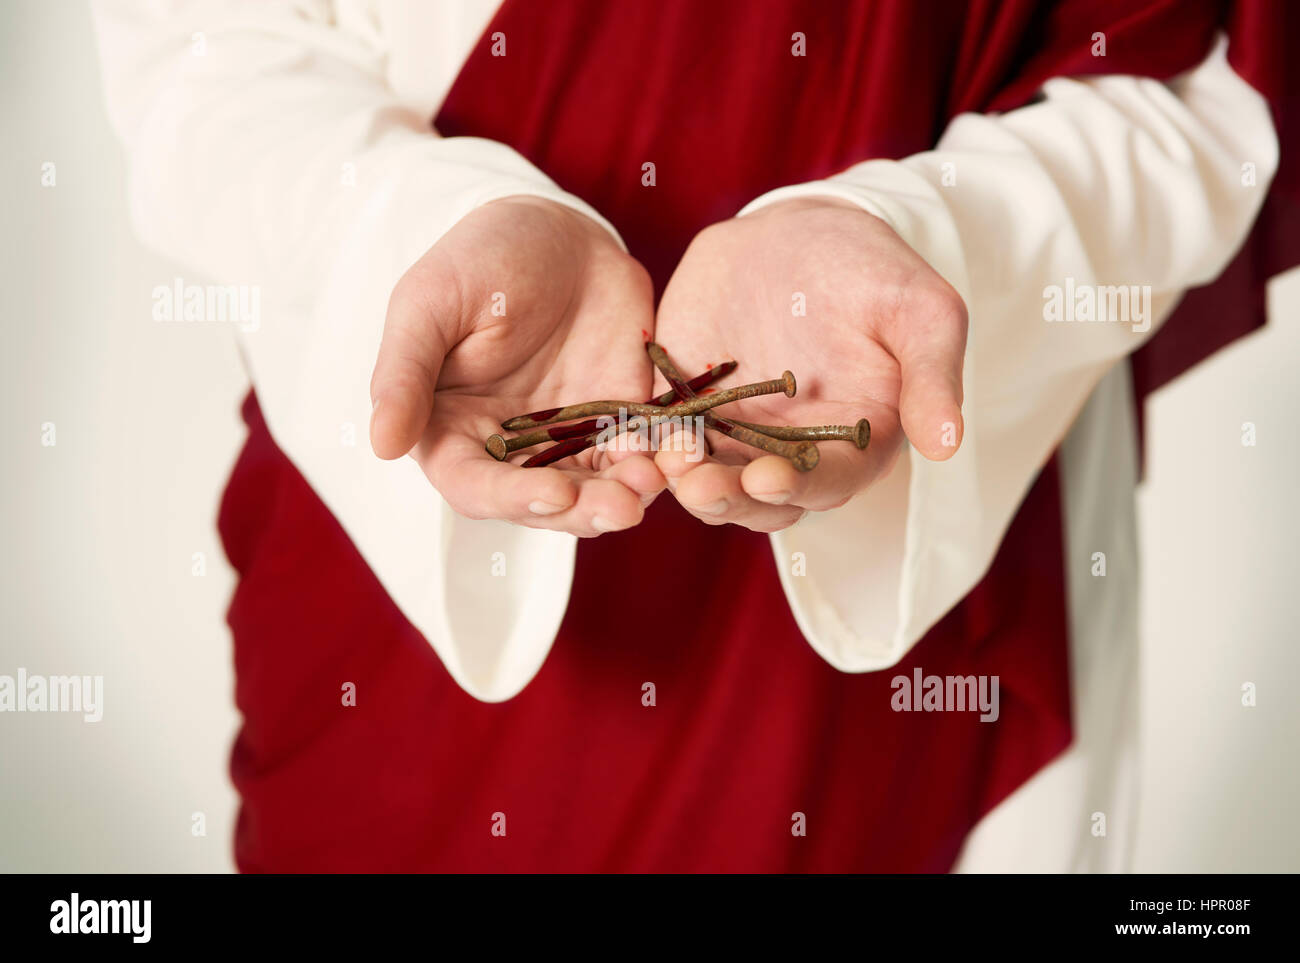 Jesus hands holding rusty nails Stock Photo